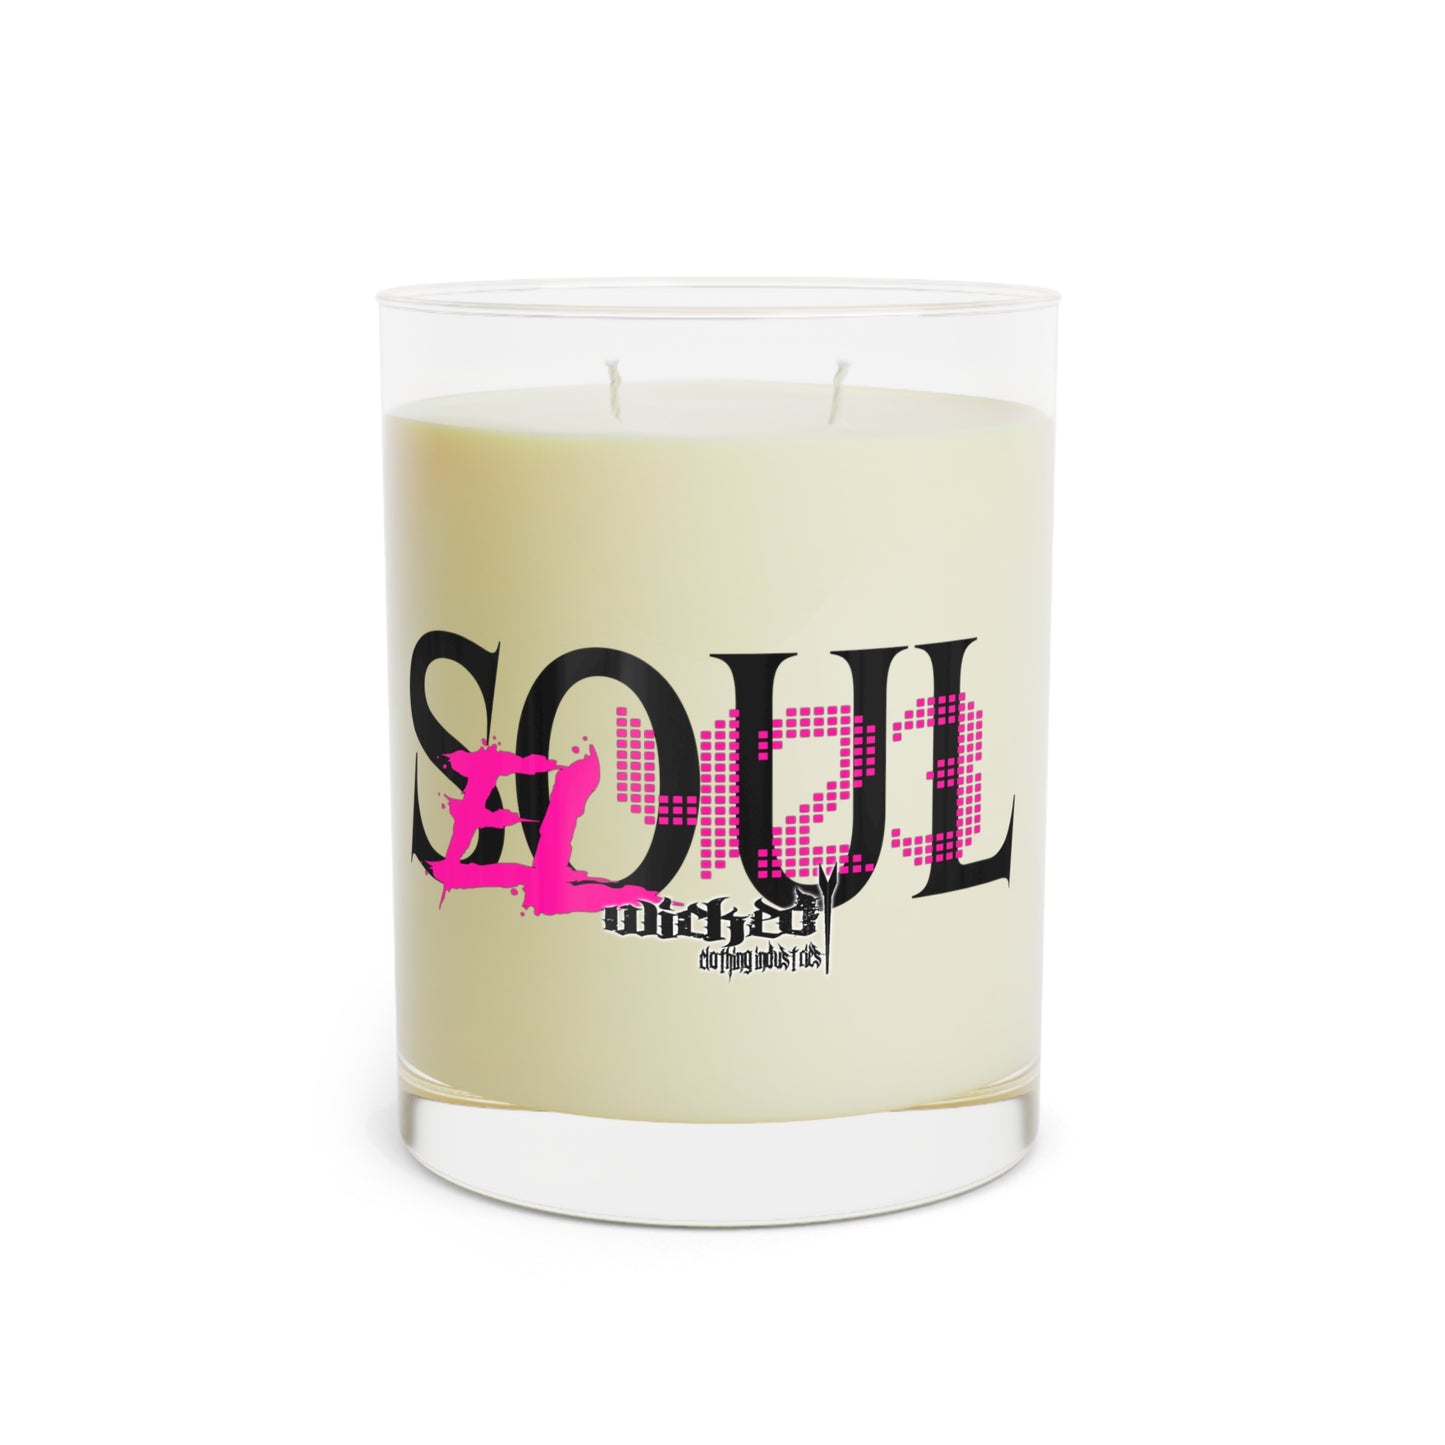 EL423 Soul /Scented Candle -  Glass, 11oz